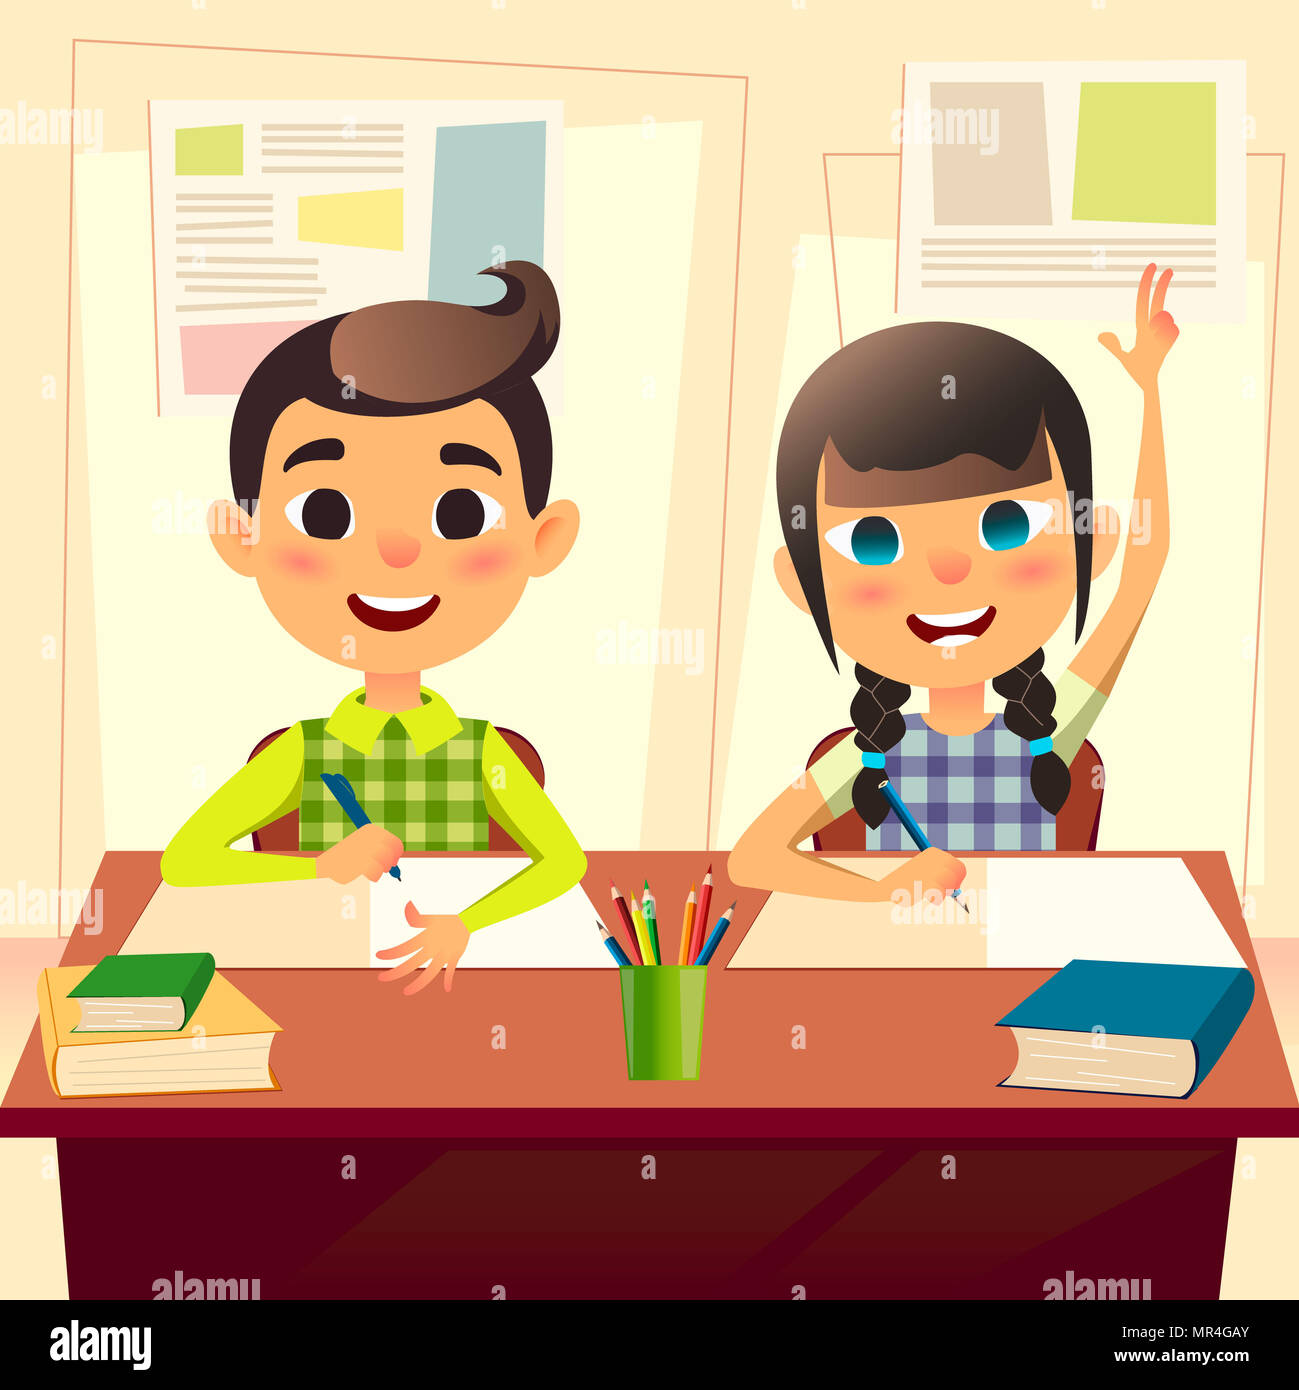 Happy children at school desk. Kids at school in class. The boy writes the assignment in the notebook. Girl two fingers up for answer. Cartoon flat students characters. Back to school concept Stock Photo